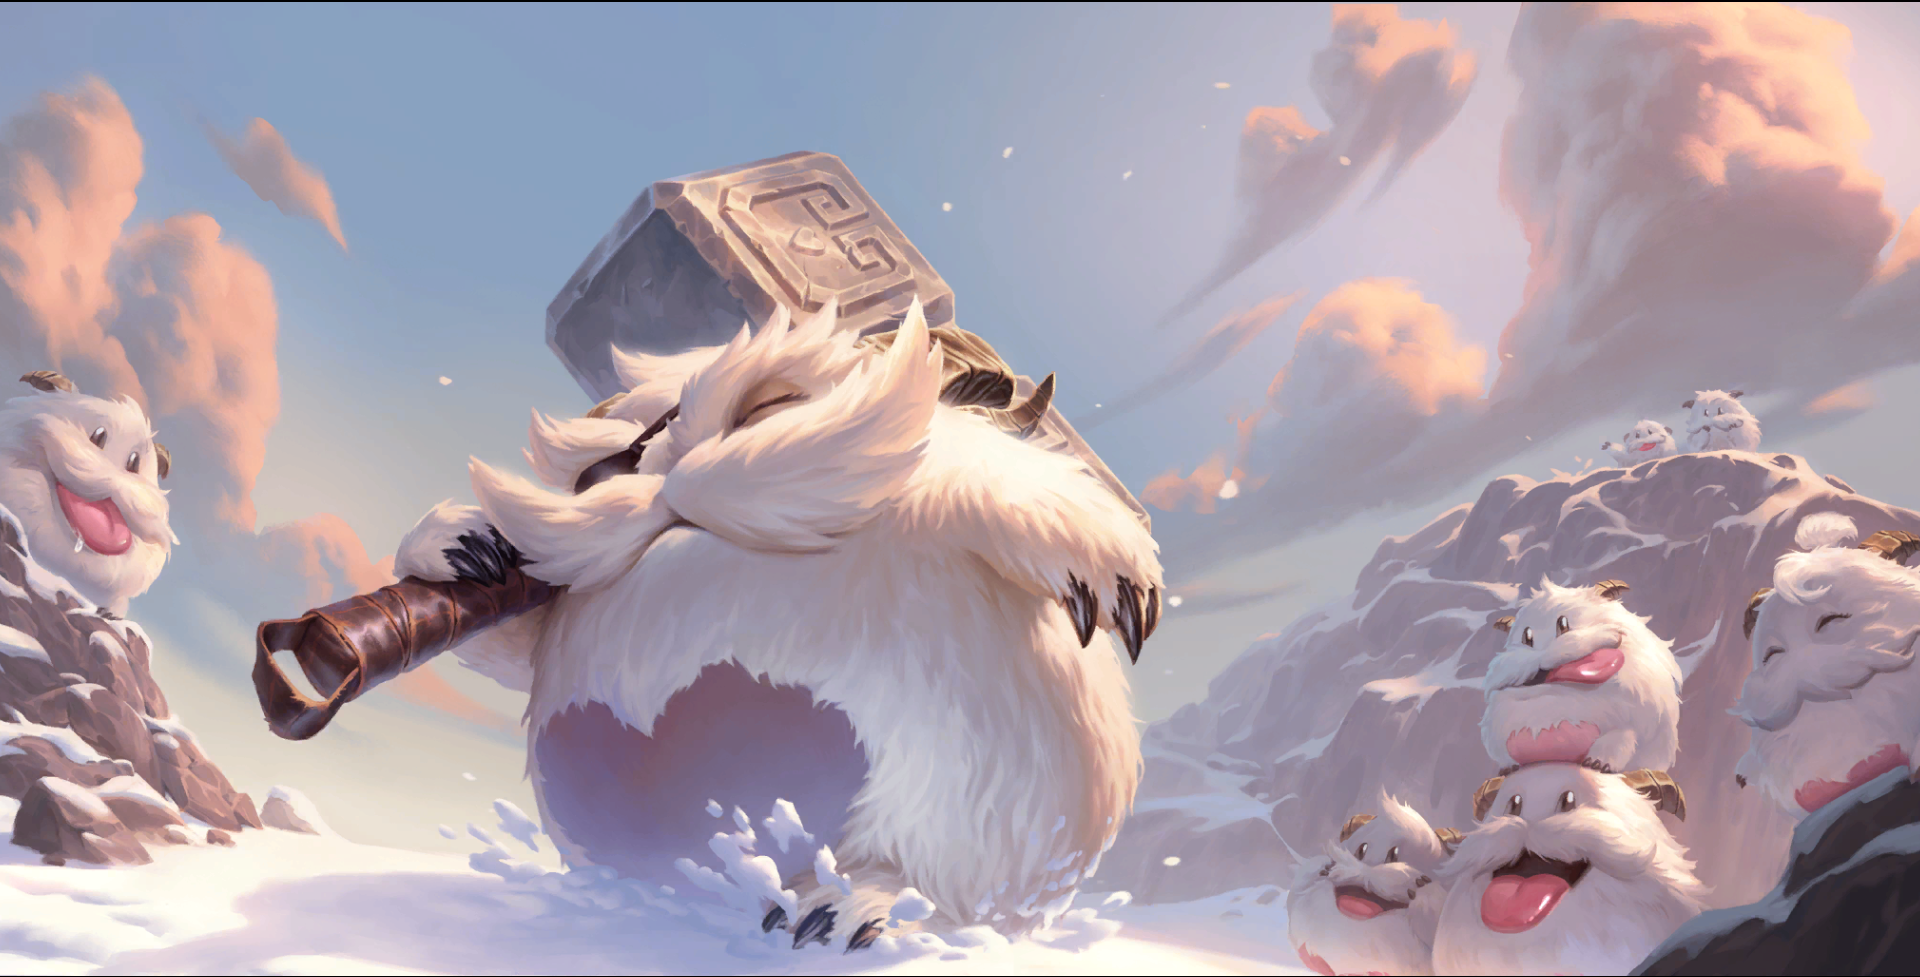 General 1920x977 Legends of Runeterra League of Legends: Wild Rift Riot Games video games video game characters sky sunlight snow claws video game art tongue out clouds League of Legends hammer eyepatches fur Video Game Creatures smiling closed eyes